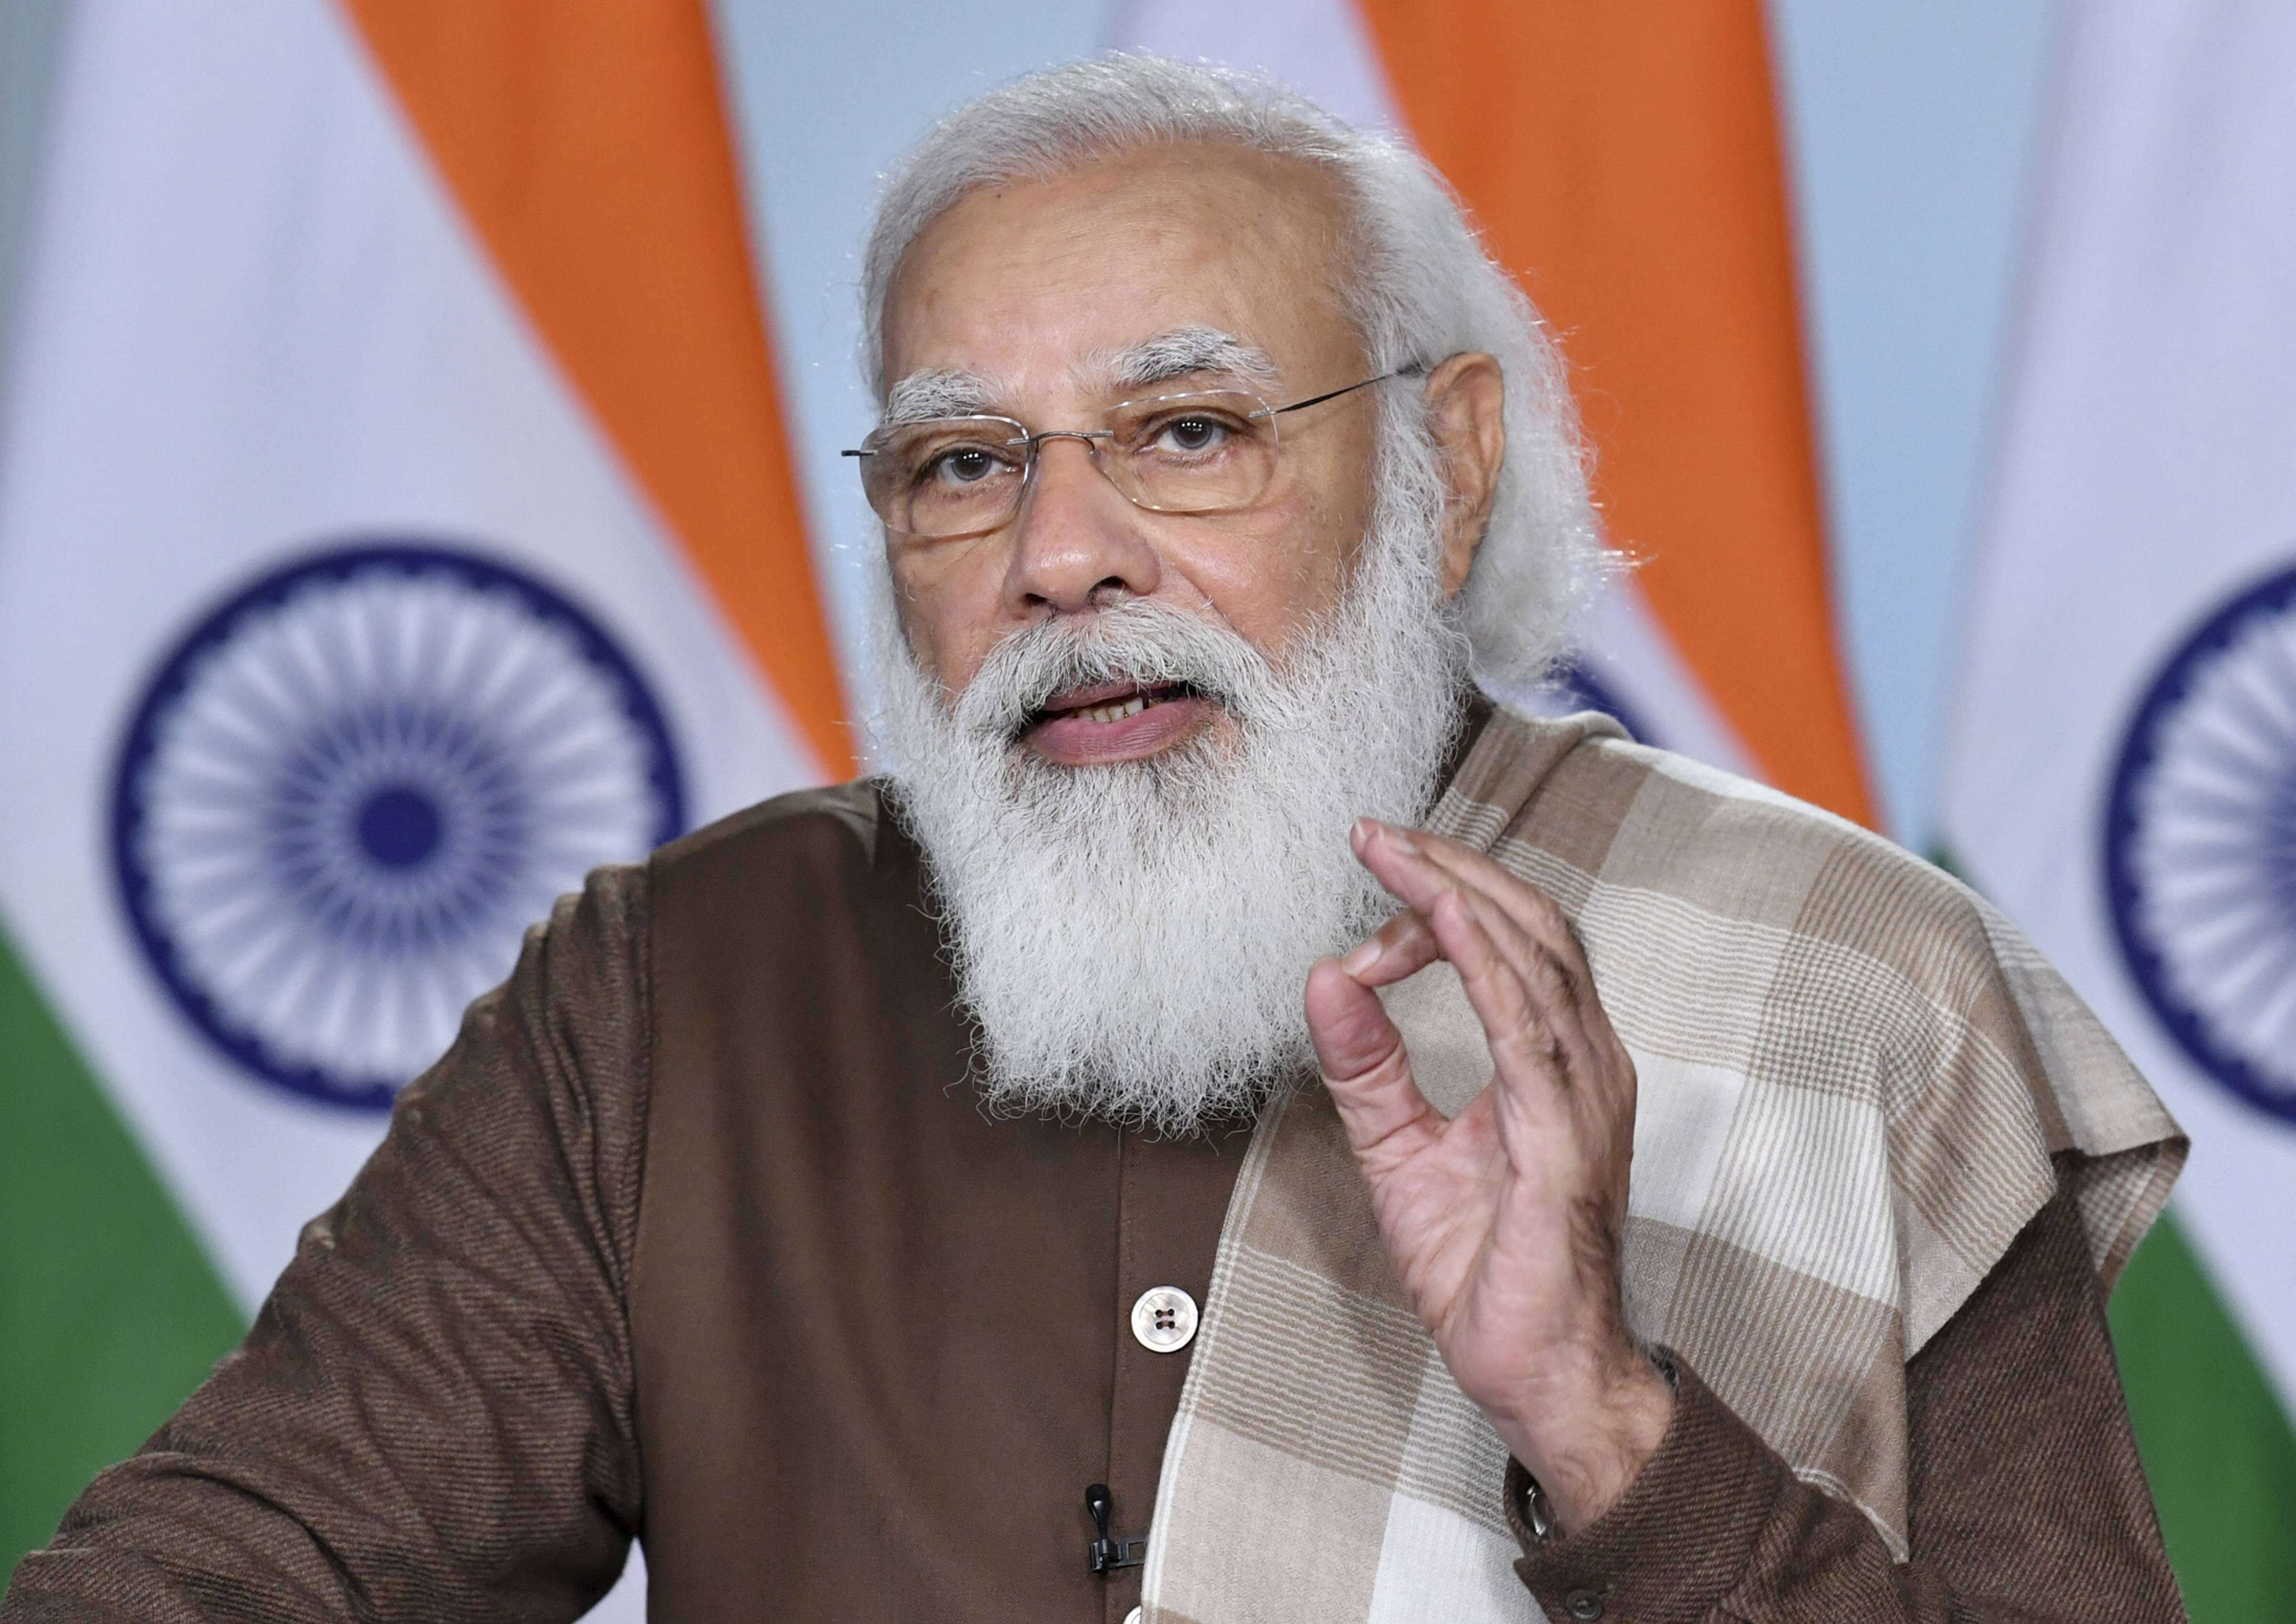 Number of start-ups in India has grown exponentially: Modi